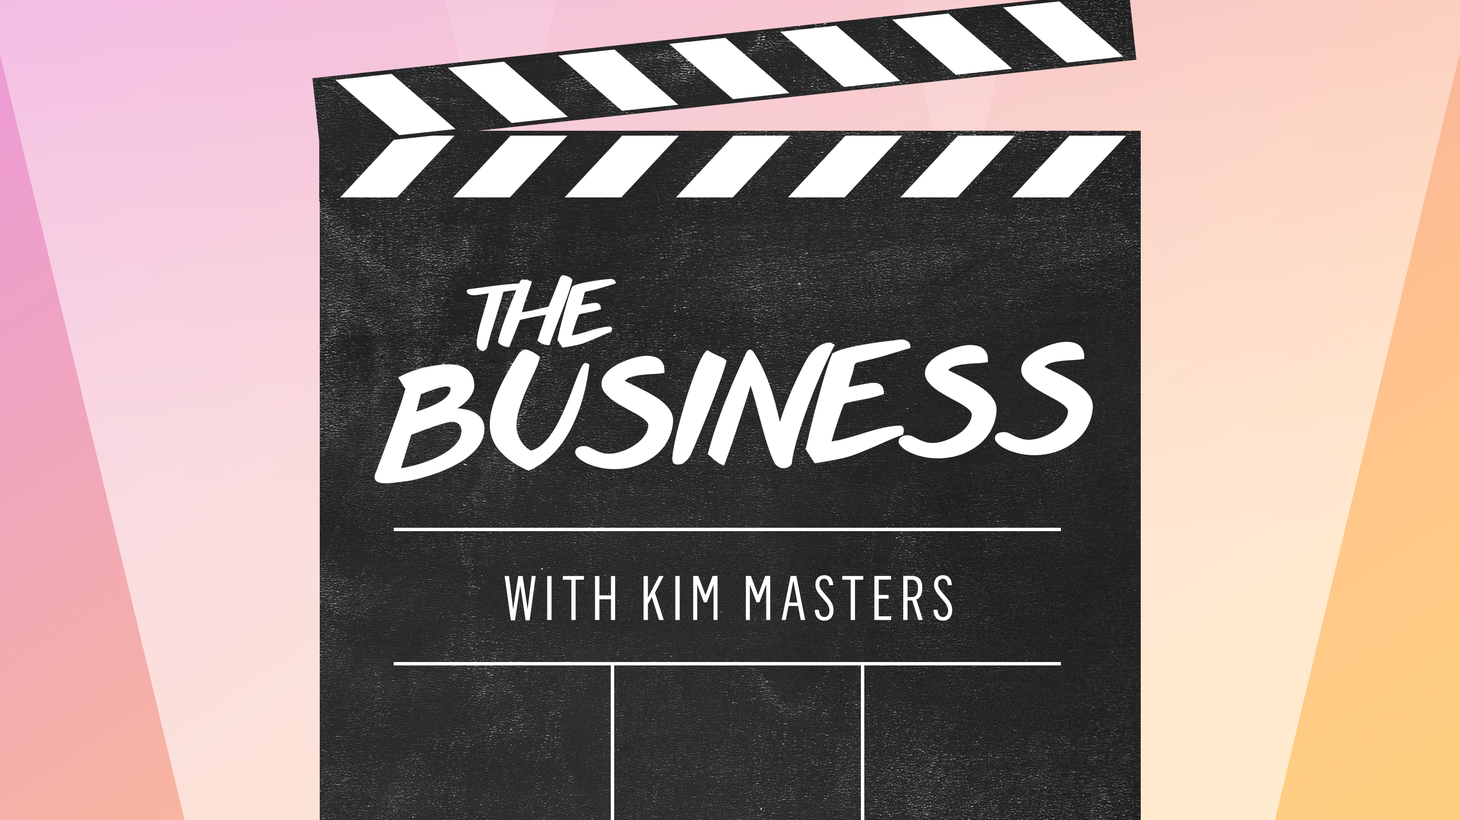 This week on The Business, we grill U.S. Attorney General John Ashcroft about his new anti-piracy initiative.  Then, we do not pass go, we do not collect $200, we go directly to "movie jail."  And once again, we see how porn leads Hollywood into the digital future. Guests include US Attorney General John Ashcroft, Alan Gasmer, SVP of the William Morris Agency, Kevin Misher, past president of production at Universal Pictures, Digital Playground Founder Joone and Tim Connelly, publisher and editor of AVN, Adult Video News.